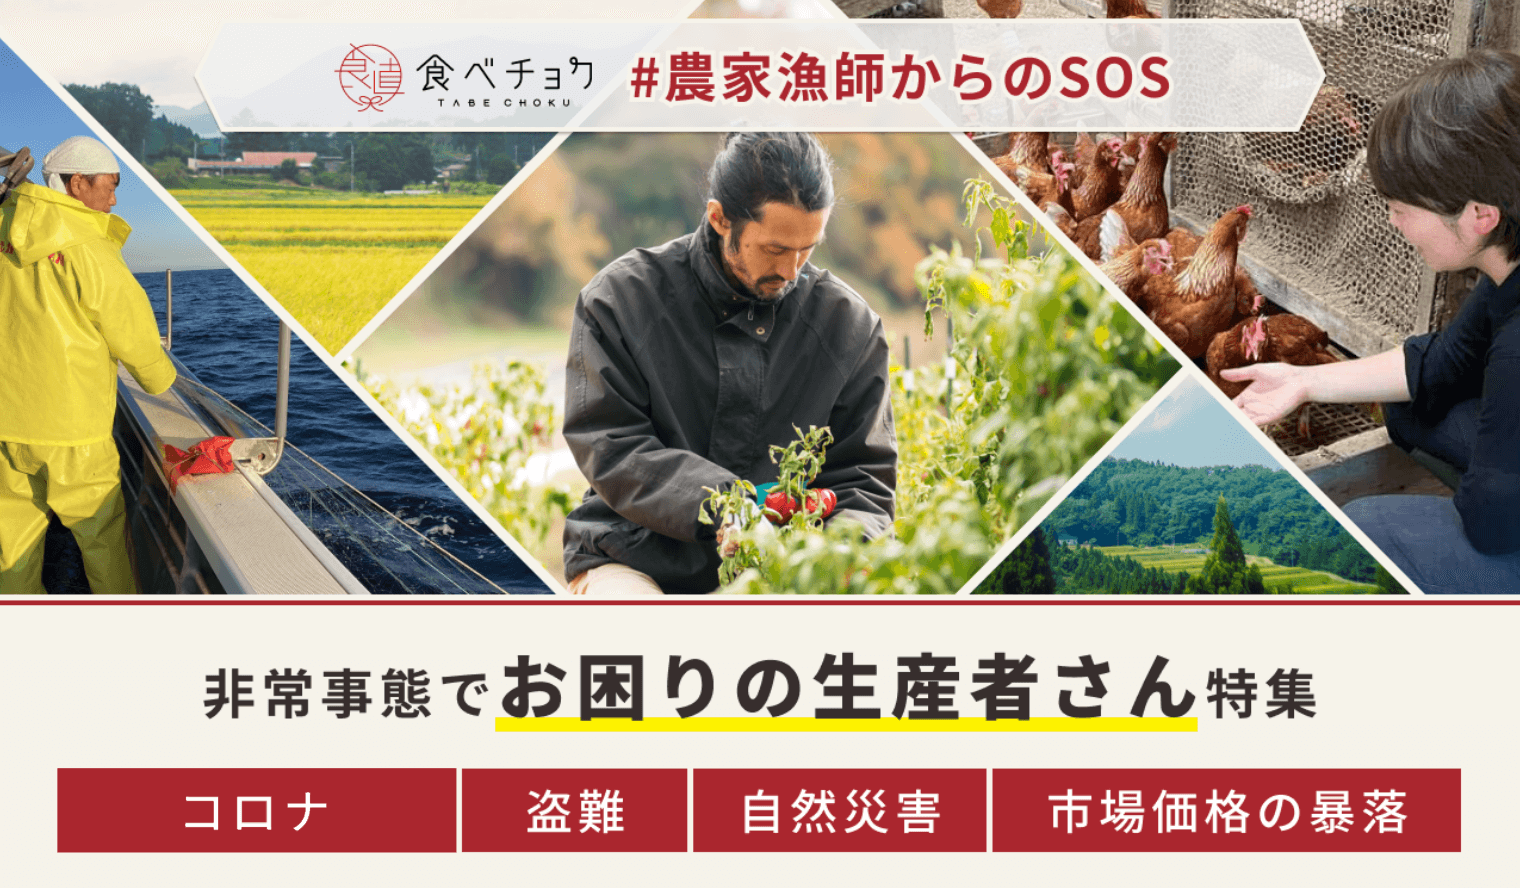 🍴 Tabechoku | [SOS from #Farmers and Fishermen] Special feature on producers who are in trouble Climate change such as rising temperatures and lack of sunlight, decreased sales due to the effects of the new coronavirus, theft...